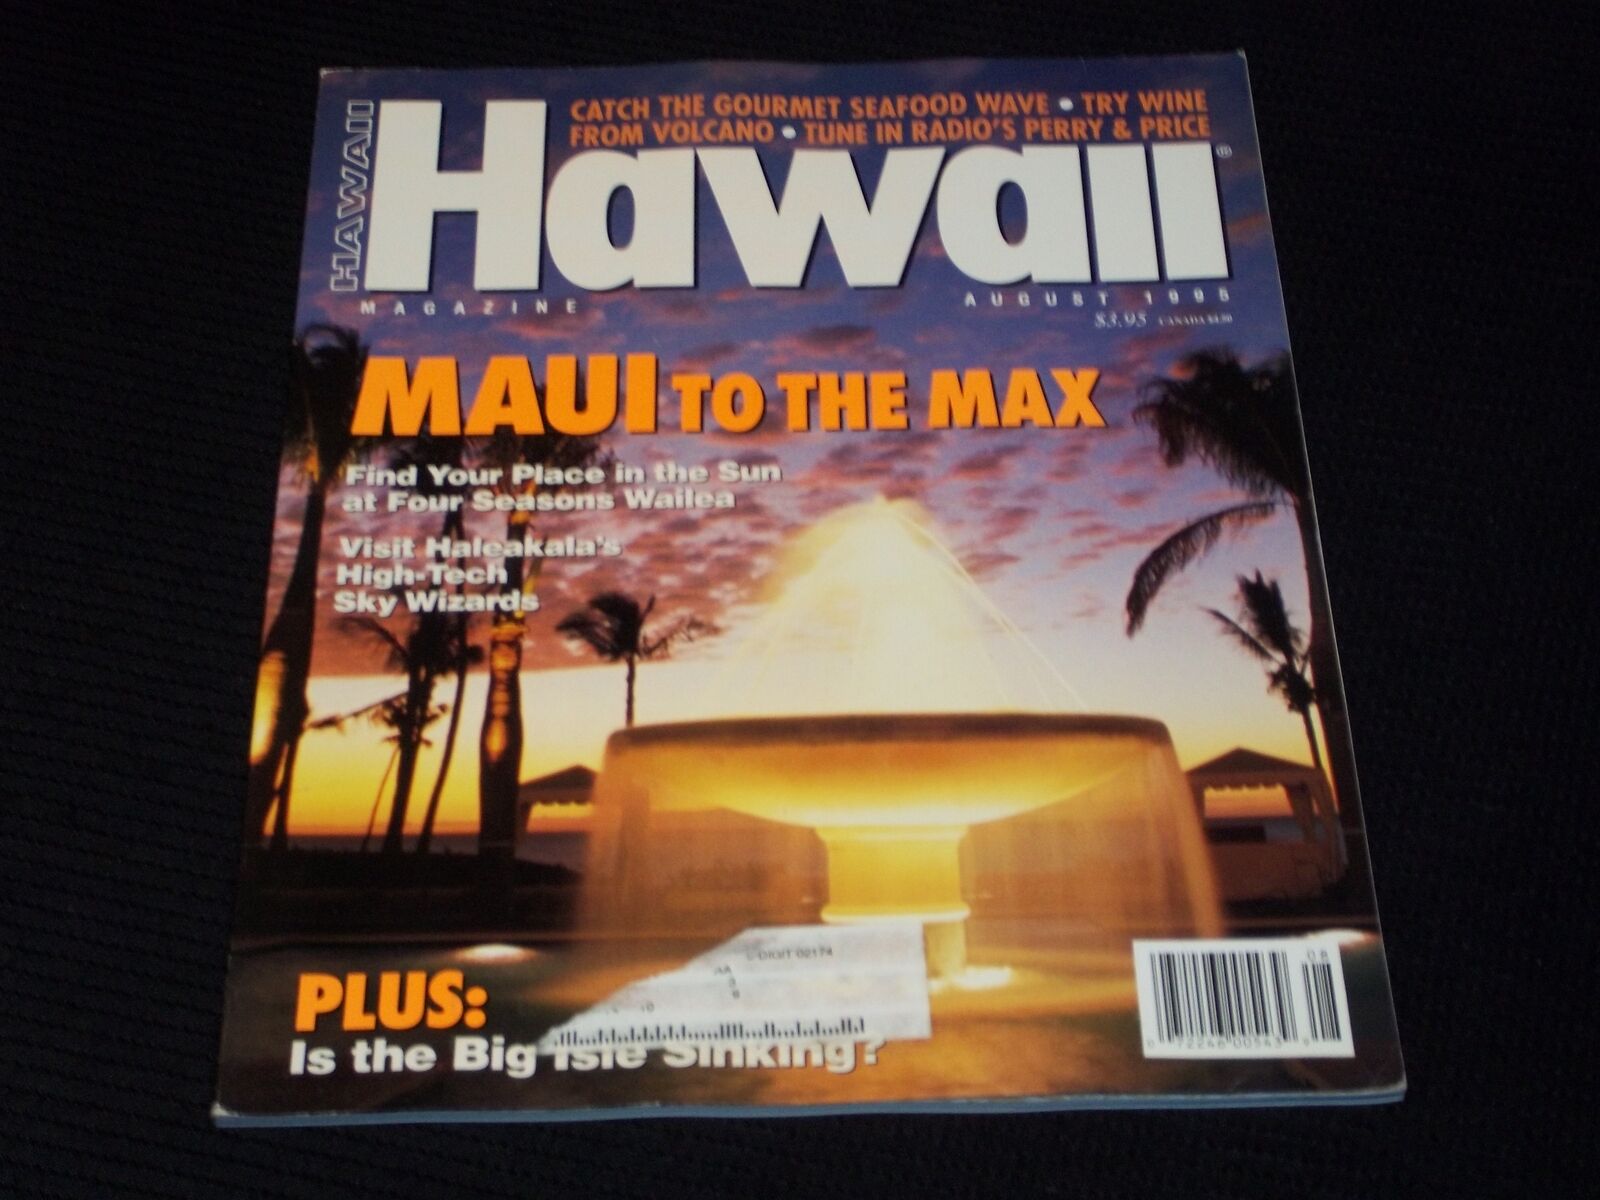 1995 AUGUST HAWAII MAGAZINE - MAUI TO THE MAX FRONT COVER - E 1667